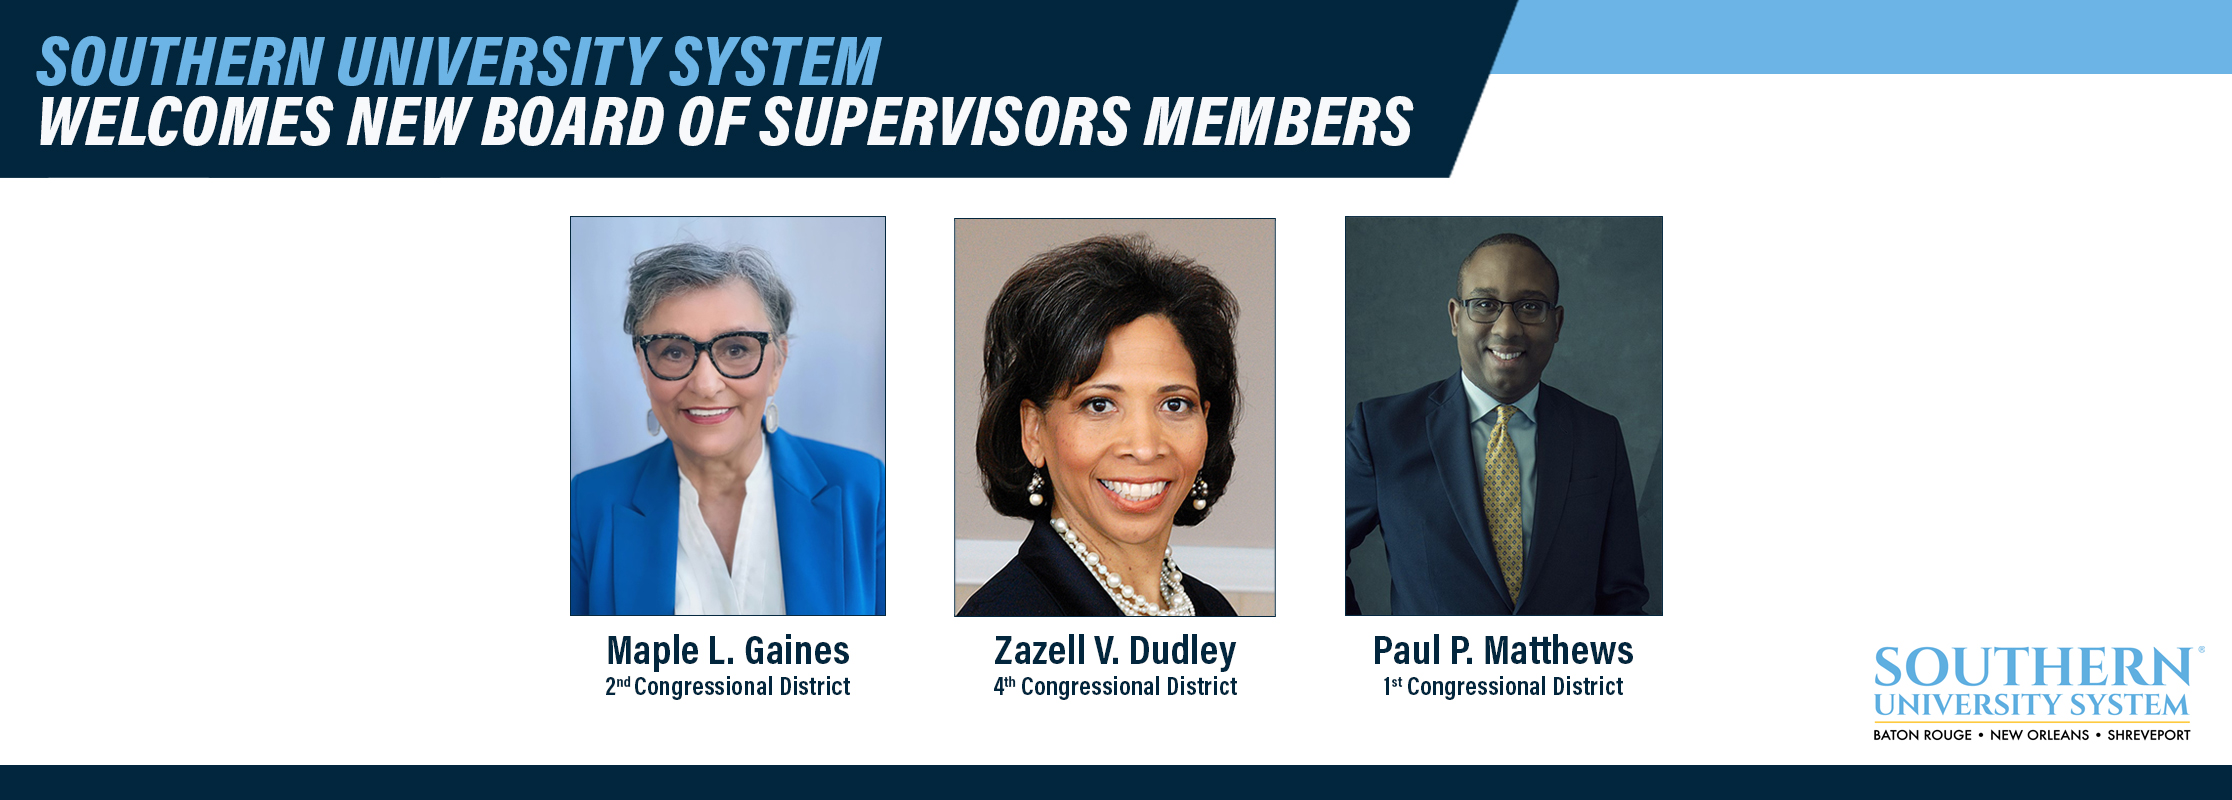 Southern University Board of Supervisors New Members